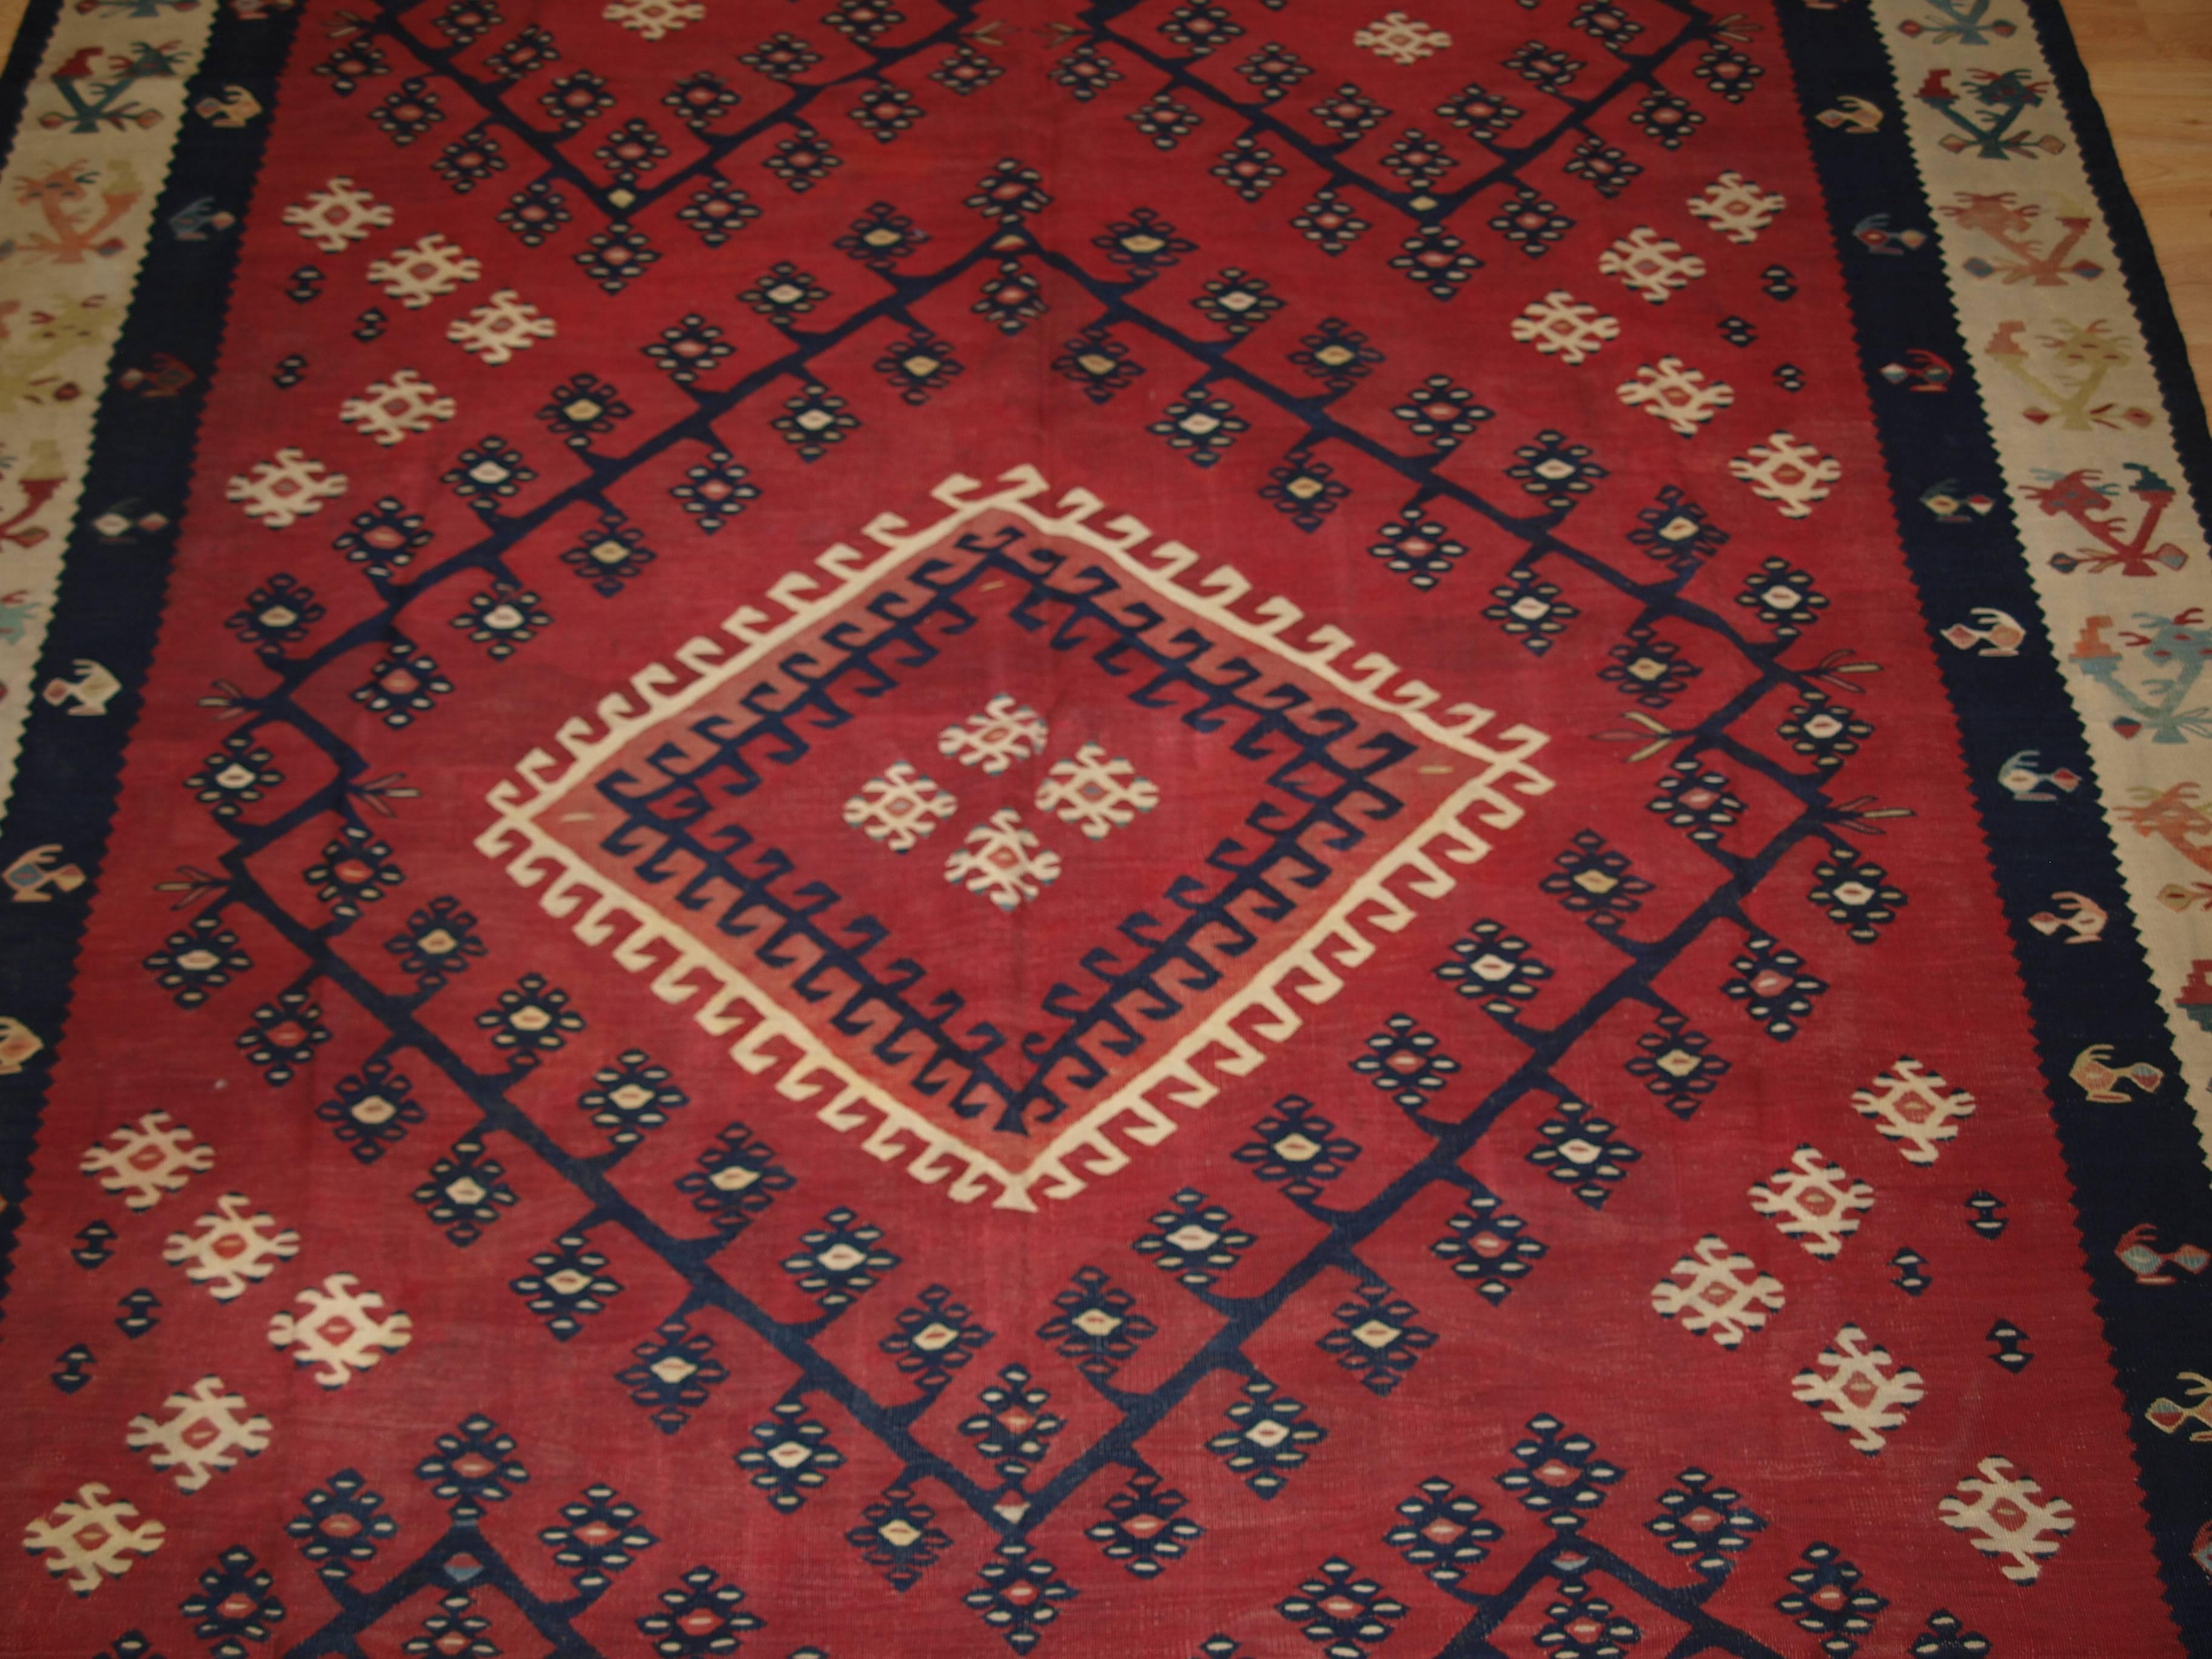 Size: 7ft 10in x 5ft 10in (240 x 178cm).

Antique anatolian Sharkoy Kilim, Western Turkey, 

circa 1870.

A really outstanding example of an early Sharkoy Kilim with cochineal dye which is only found in the earliest examples.

Sharkoy kilims